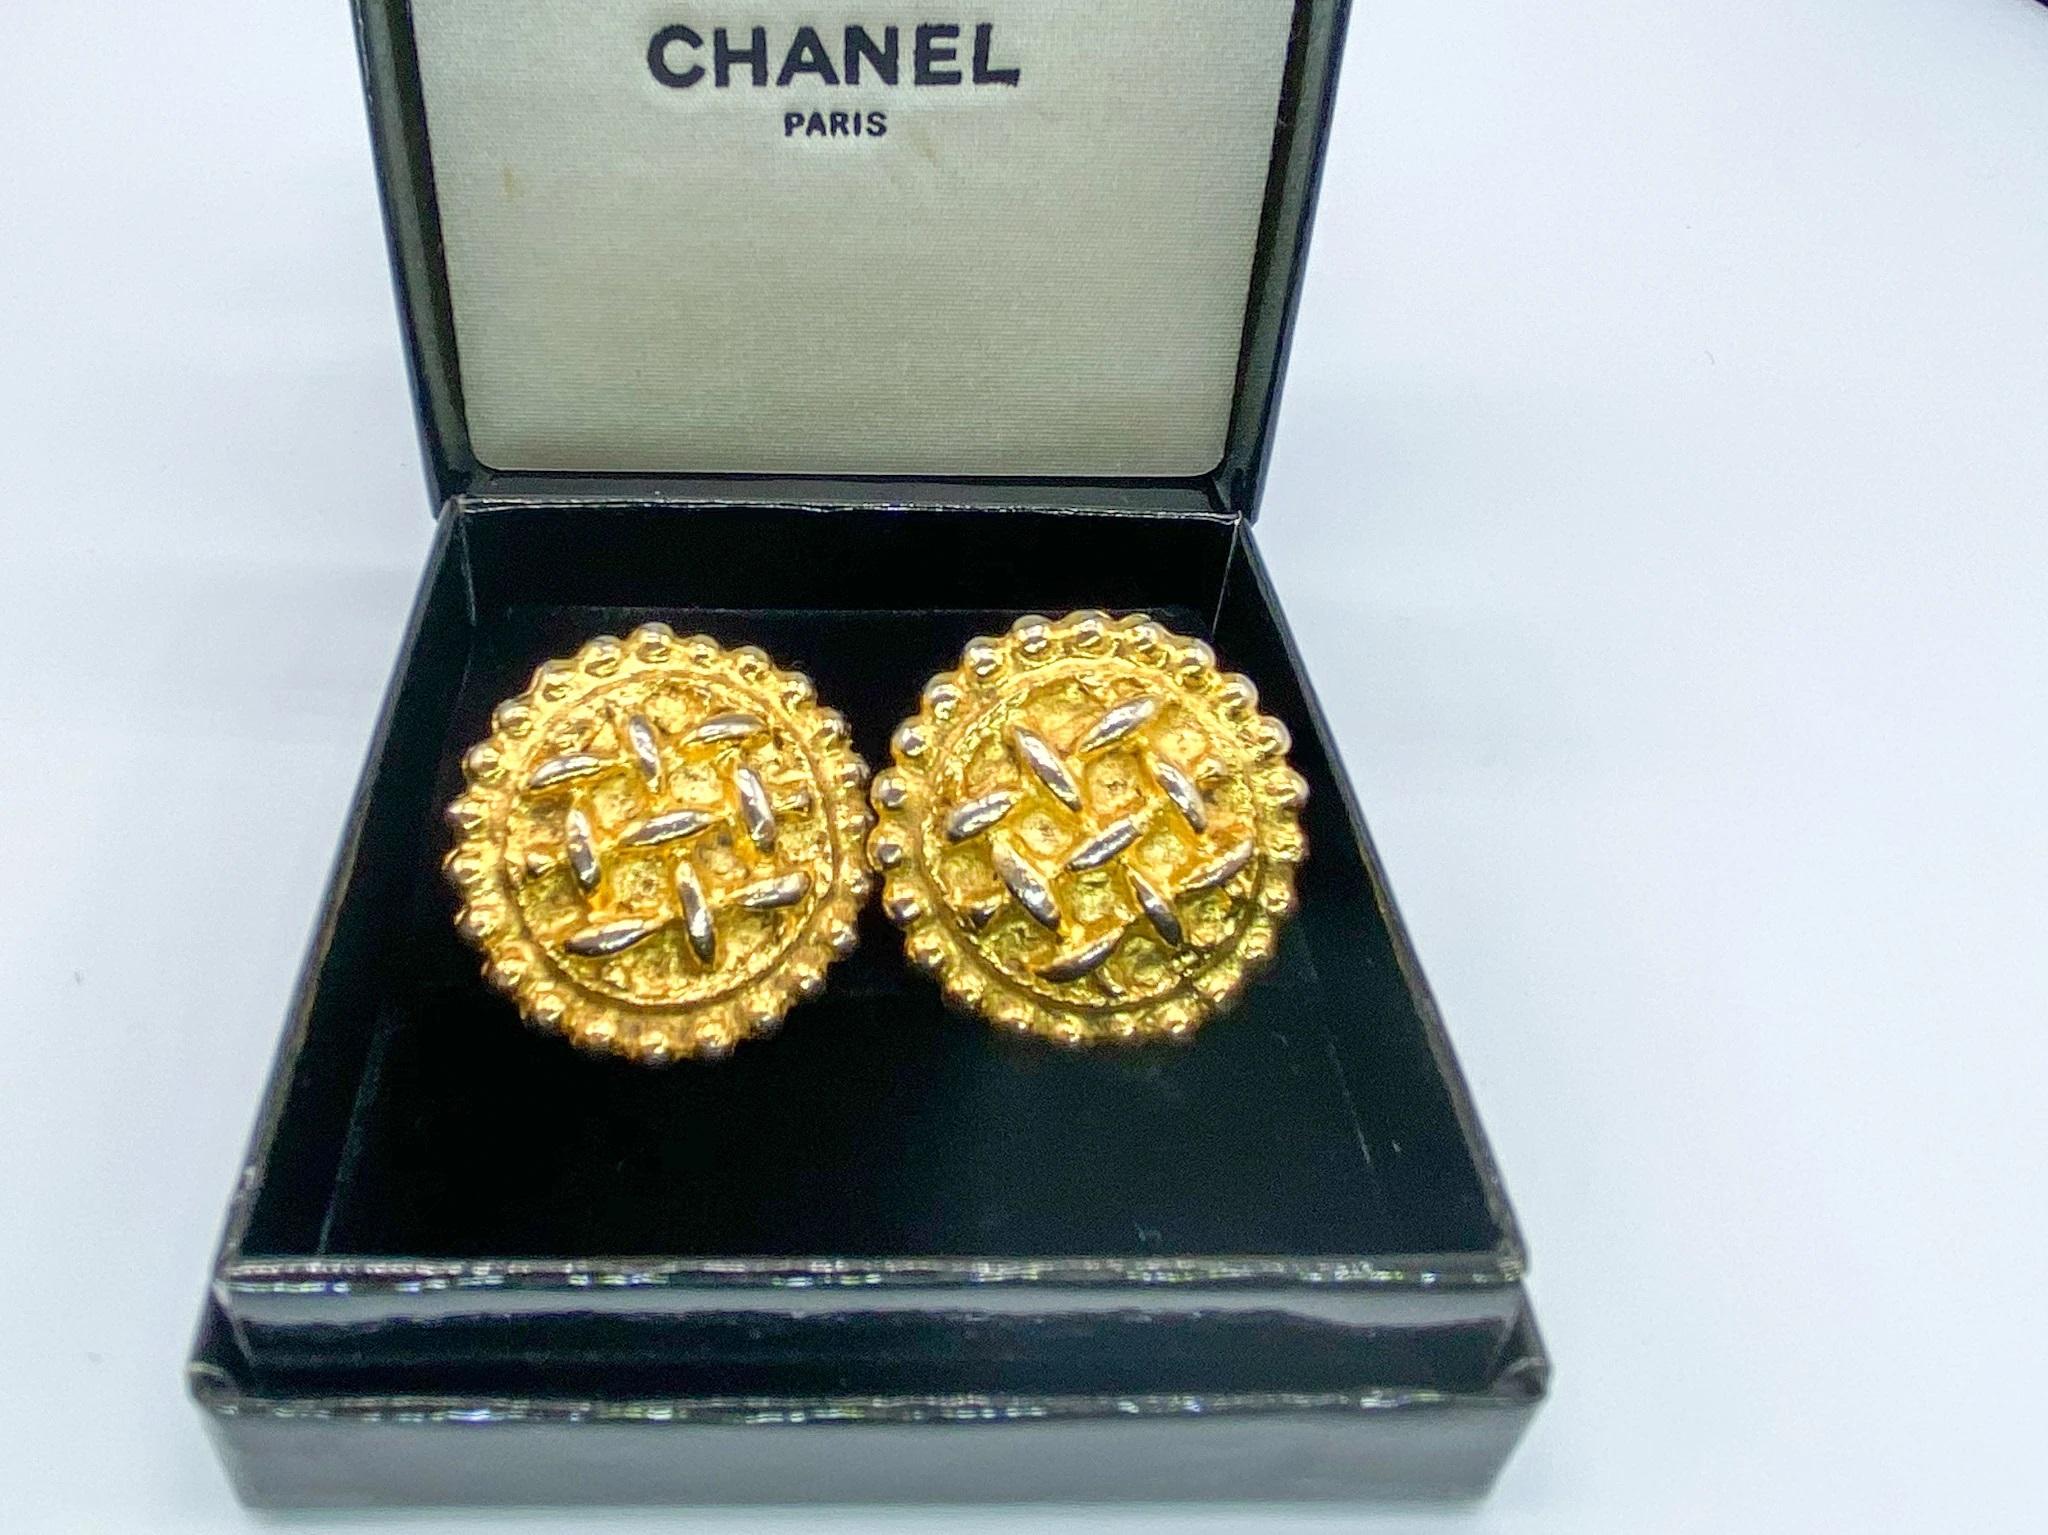 Chanel 1980s Vintage Gold Plated Clip On Earrings. 

Fantastic statement 80s earrings from chanel, the most desirable fashion labelling the world. These earrings were featured in a Chanel campaign in the 80s (see photo) - so an extra special find!